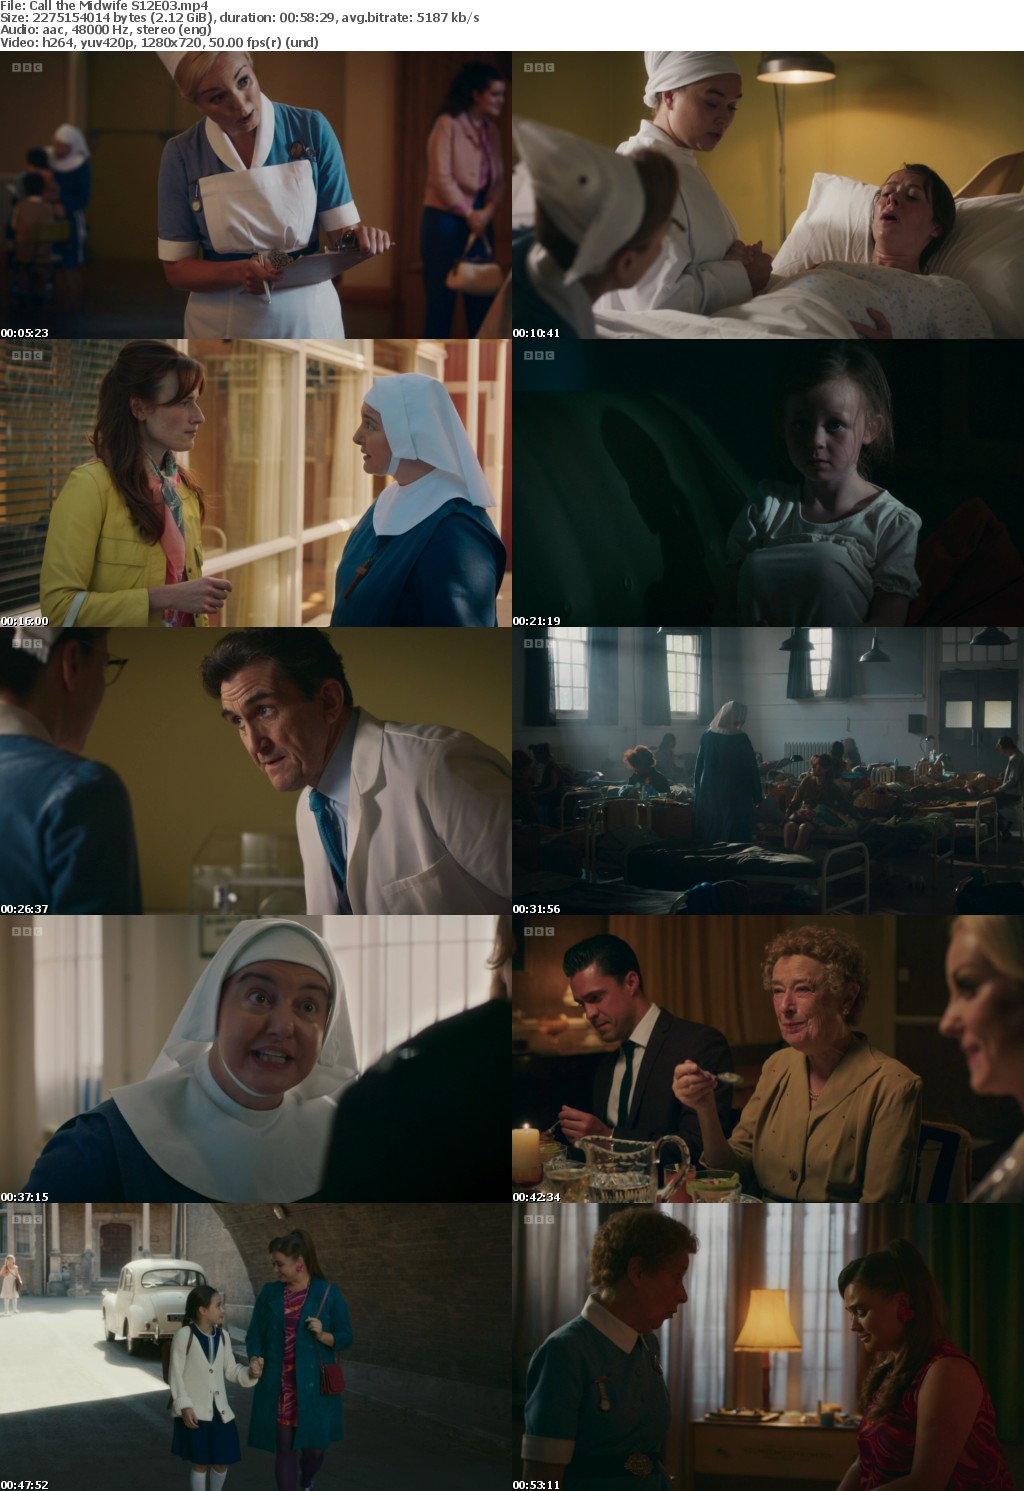 Call the Midwife S12E03 (1280x720p HD, 50fps, soft Eng subs)